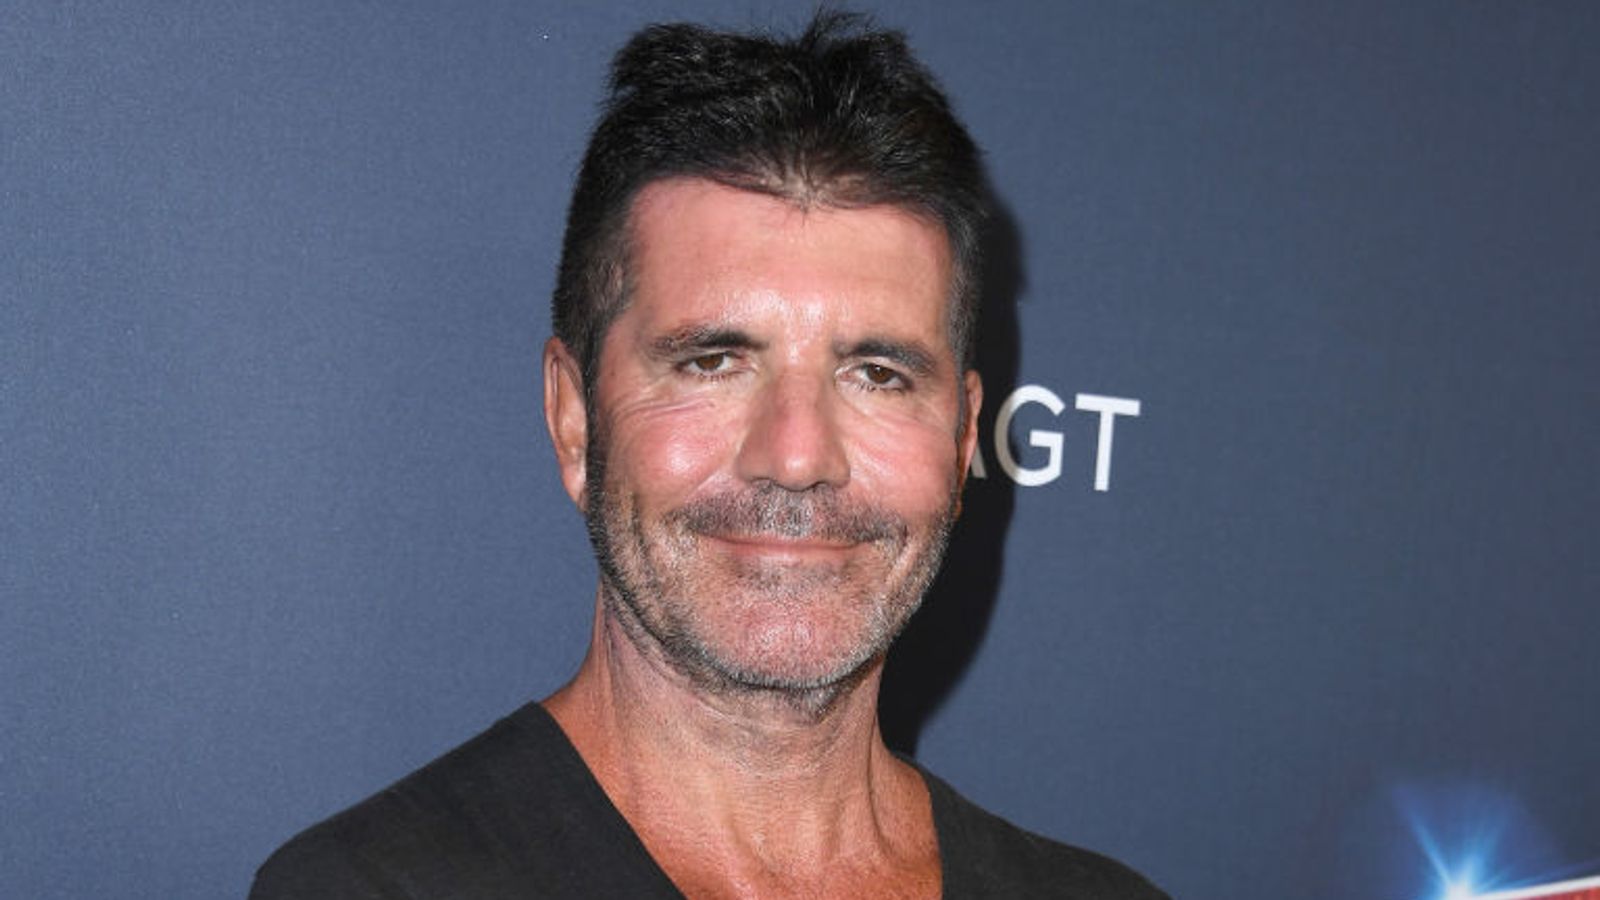 Simon Cowell breaks his back while testing electric bicycle